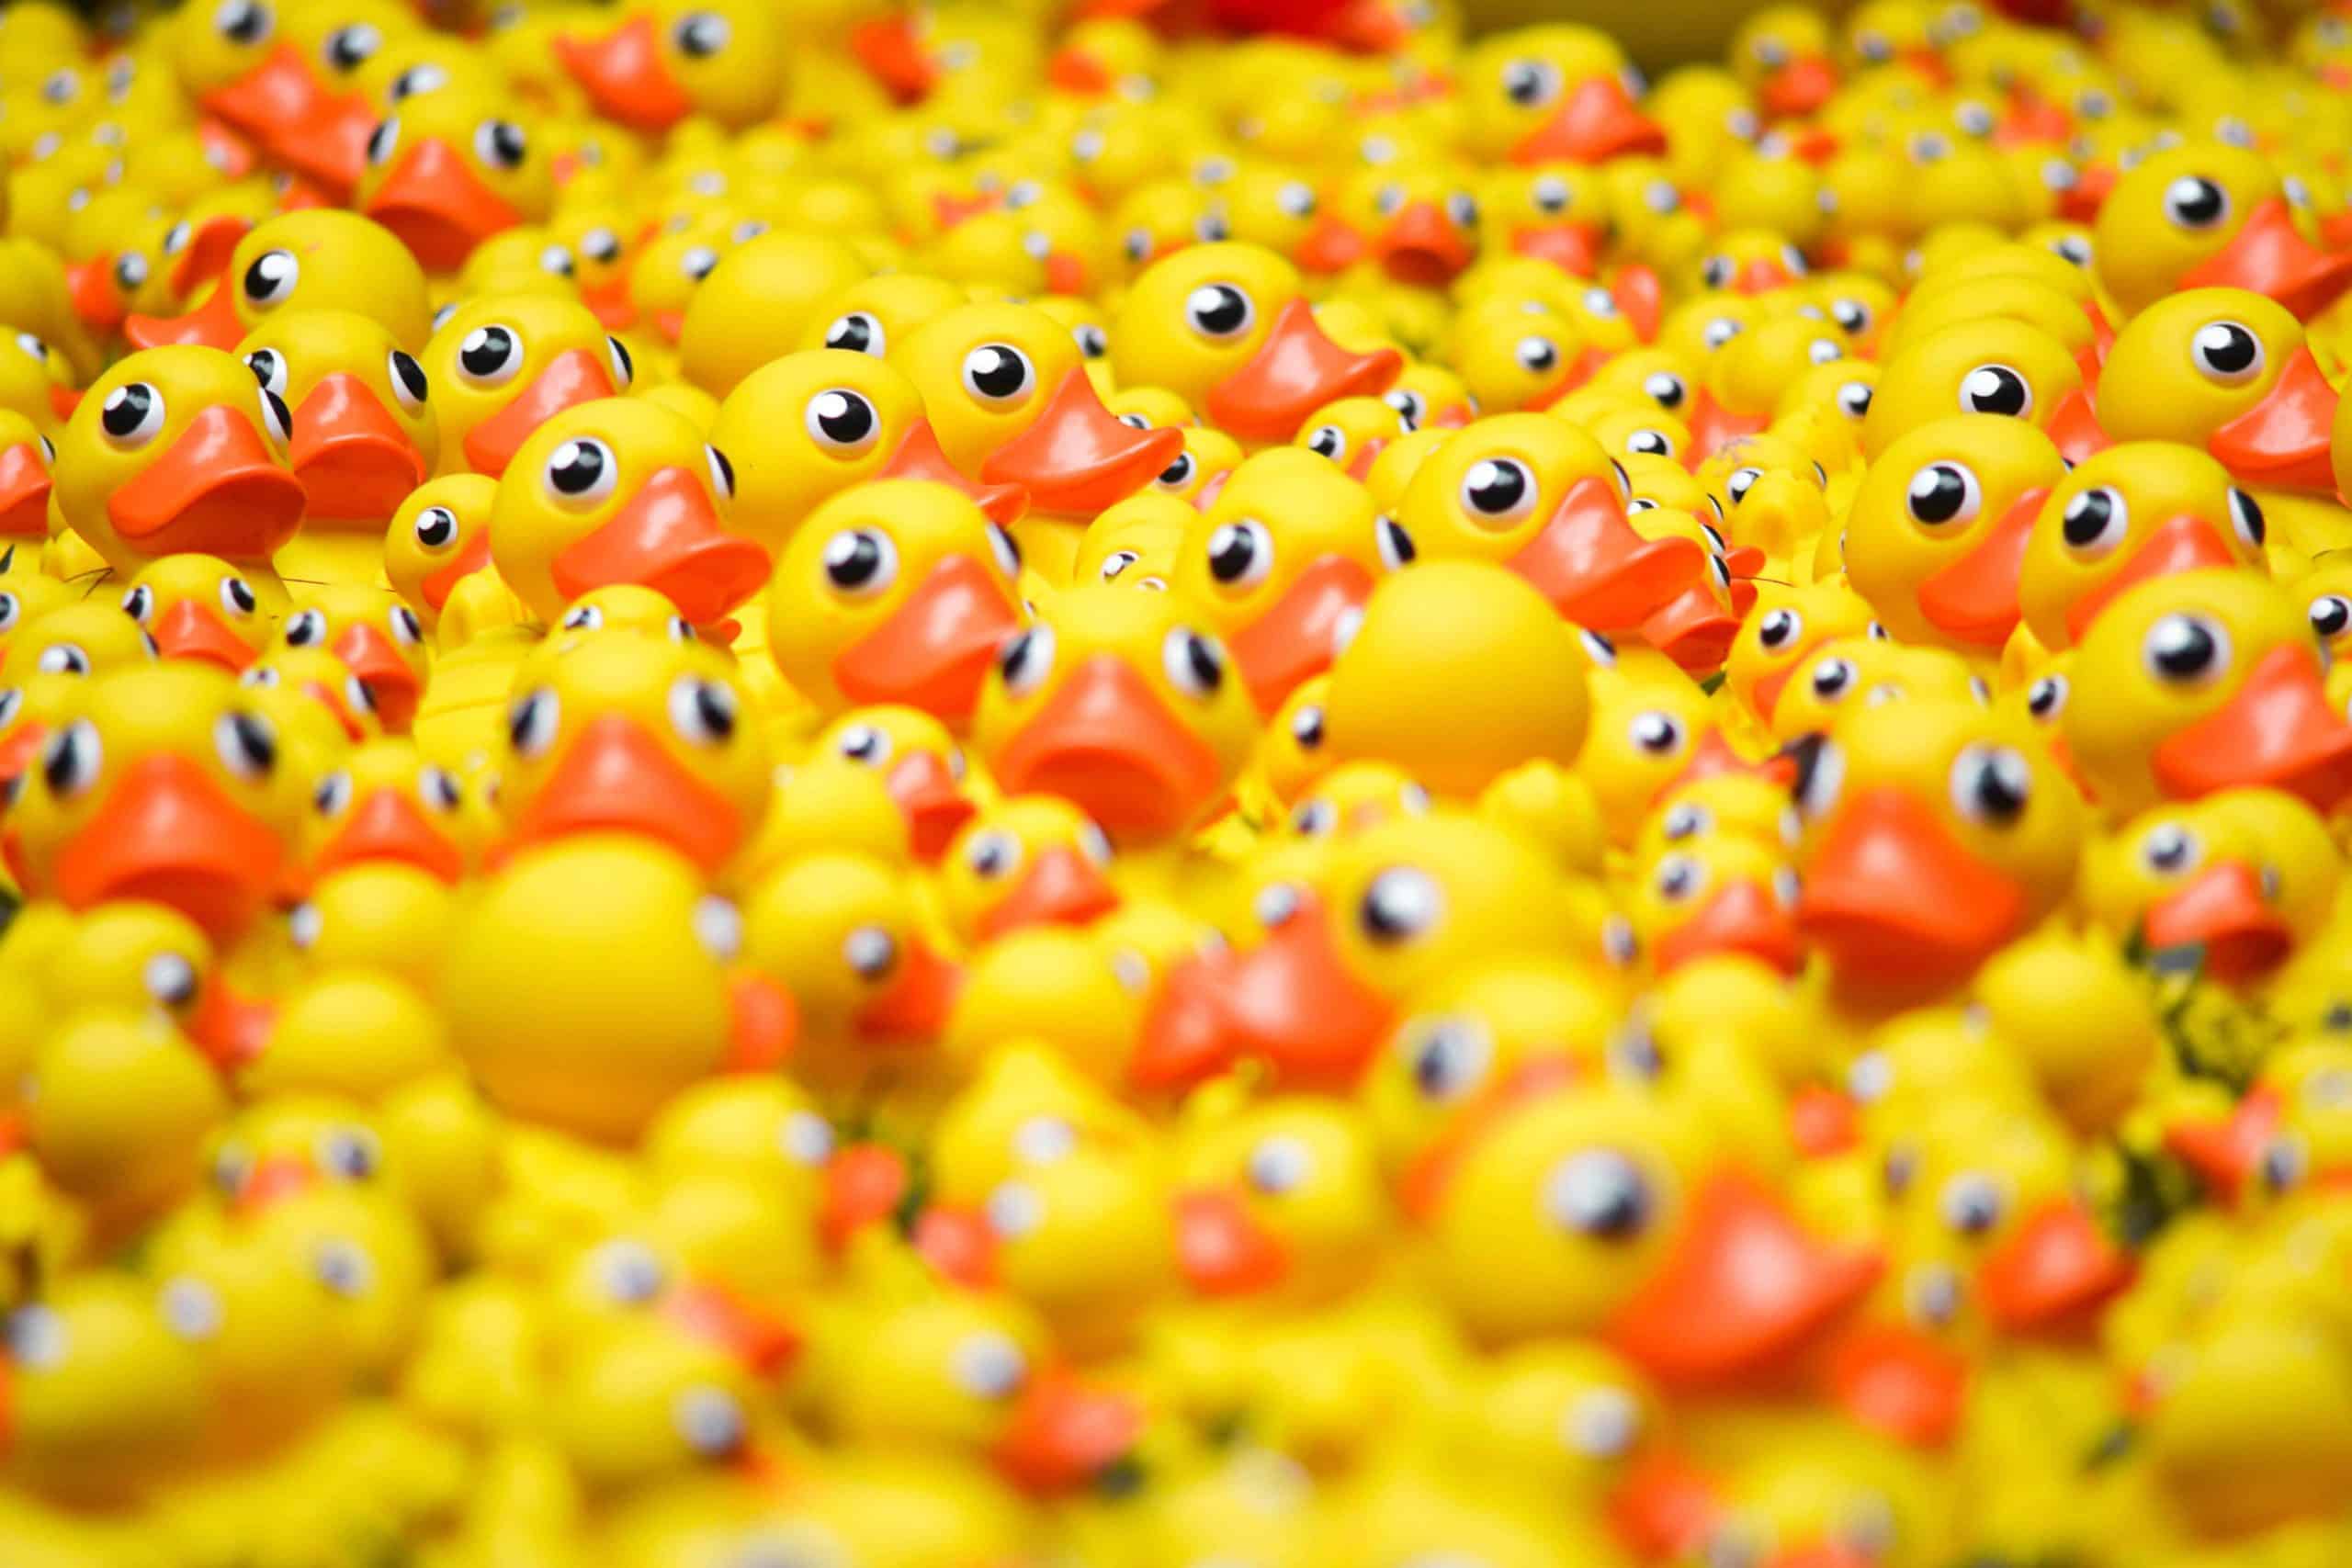 An uncountable amount of rubber duckies together.